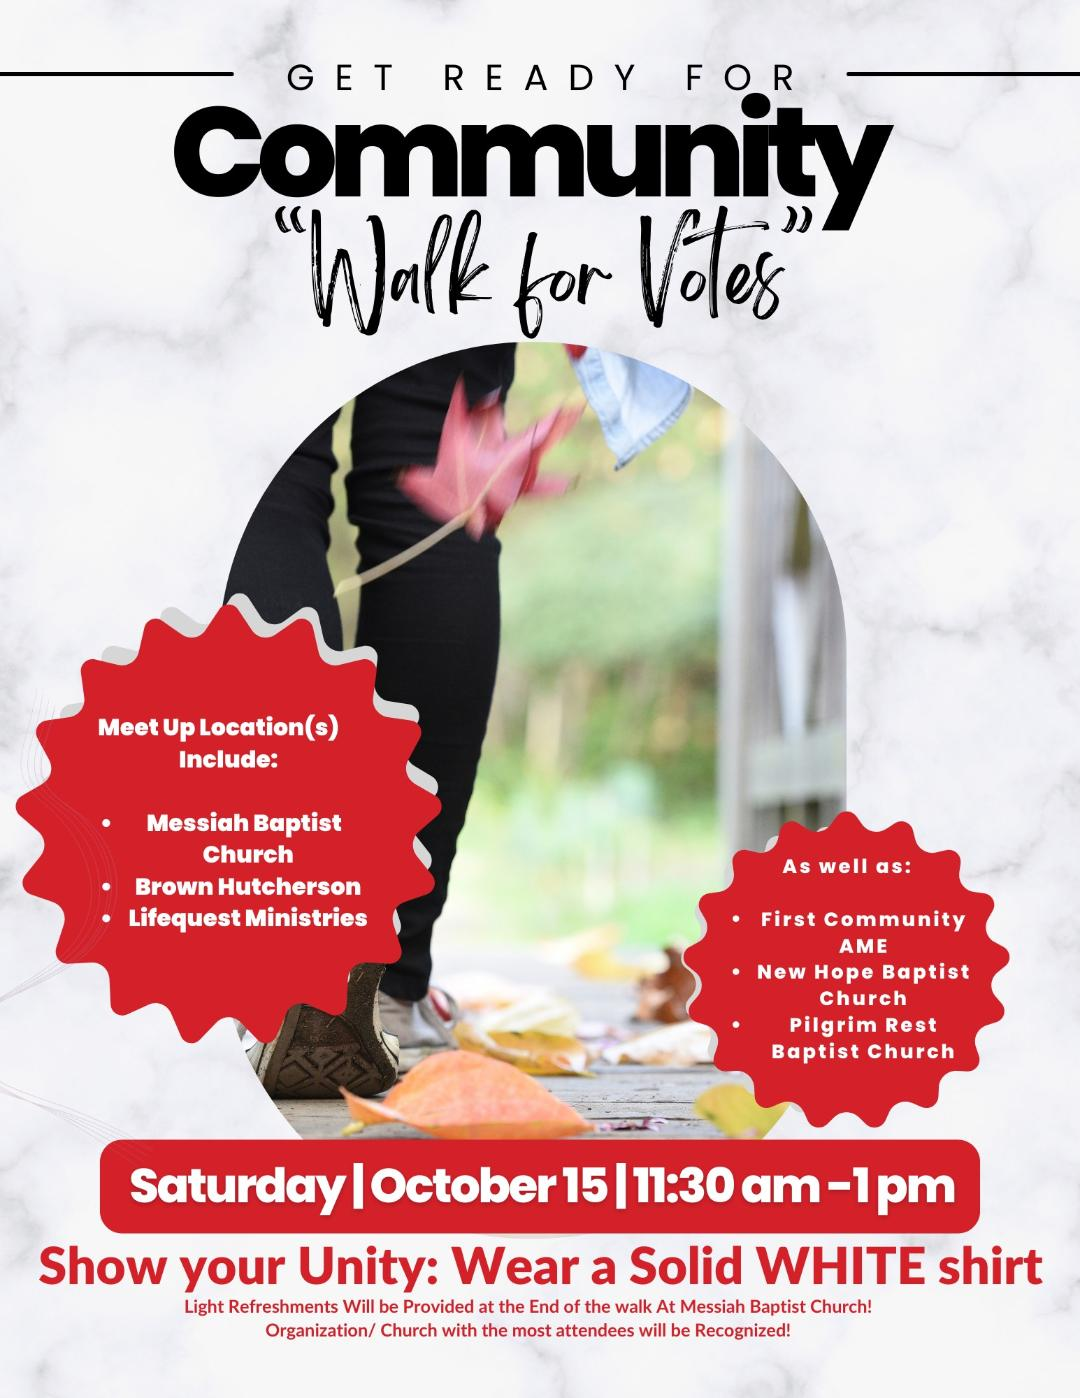 Get ready for Community "Walk for Votes" in Grand Rapids!